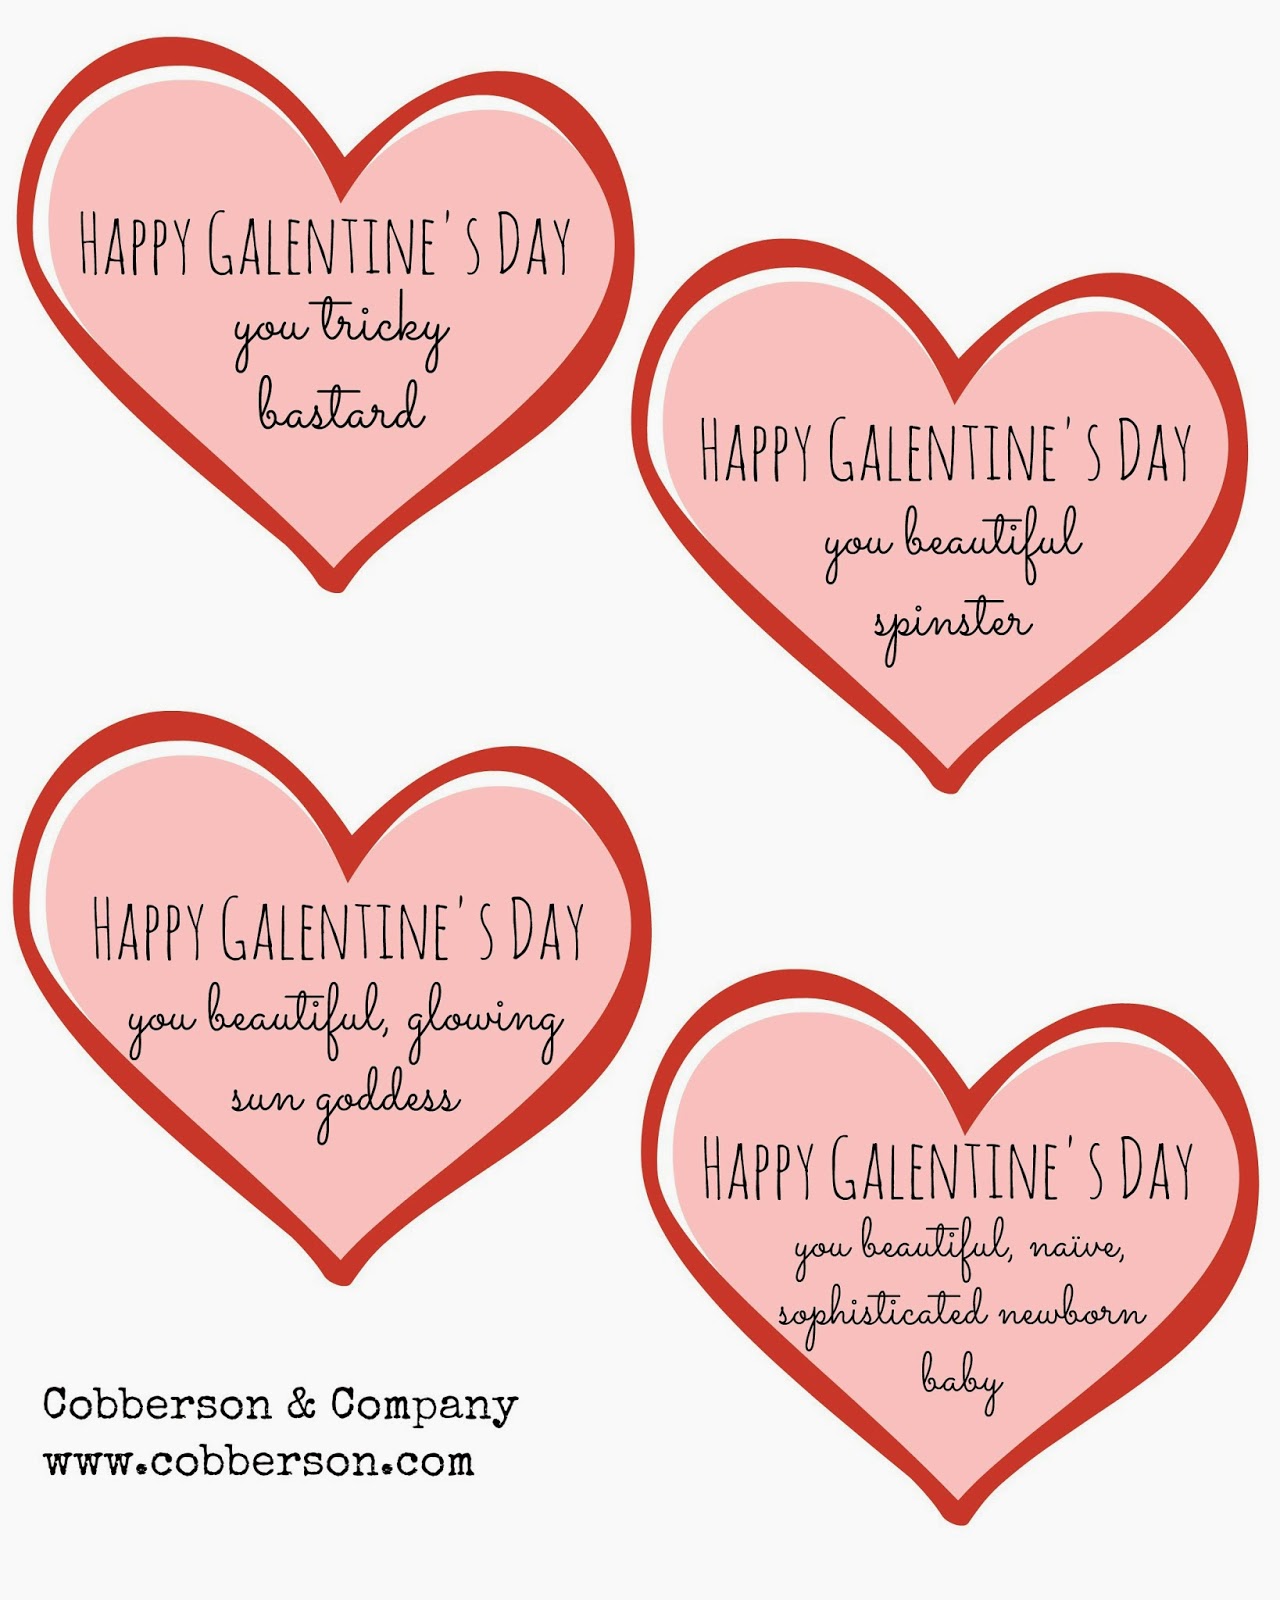 new-galentine-s-day-mugs-are-here-free-printable-cobberson-co